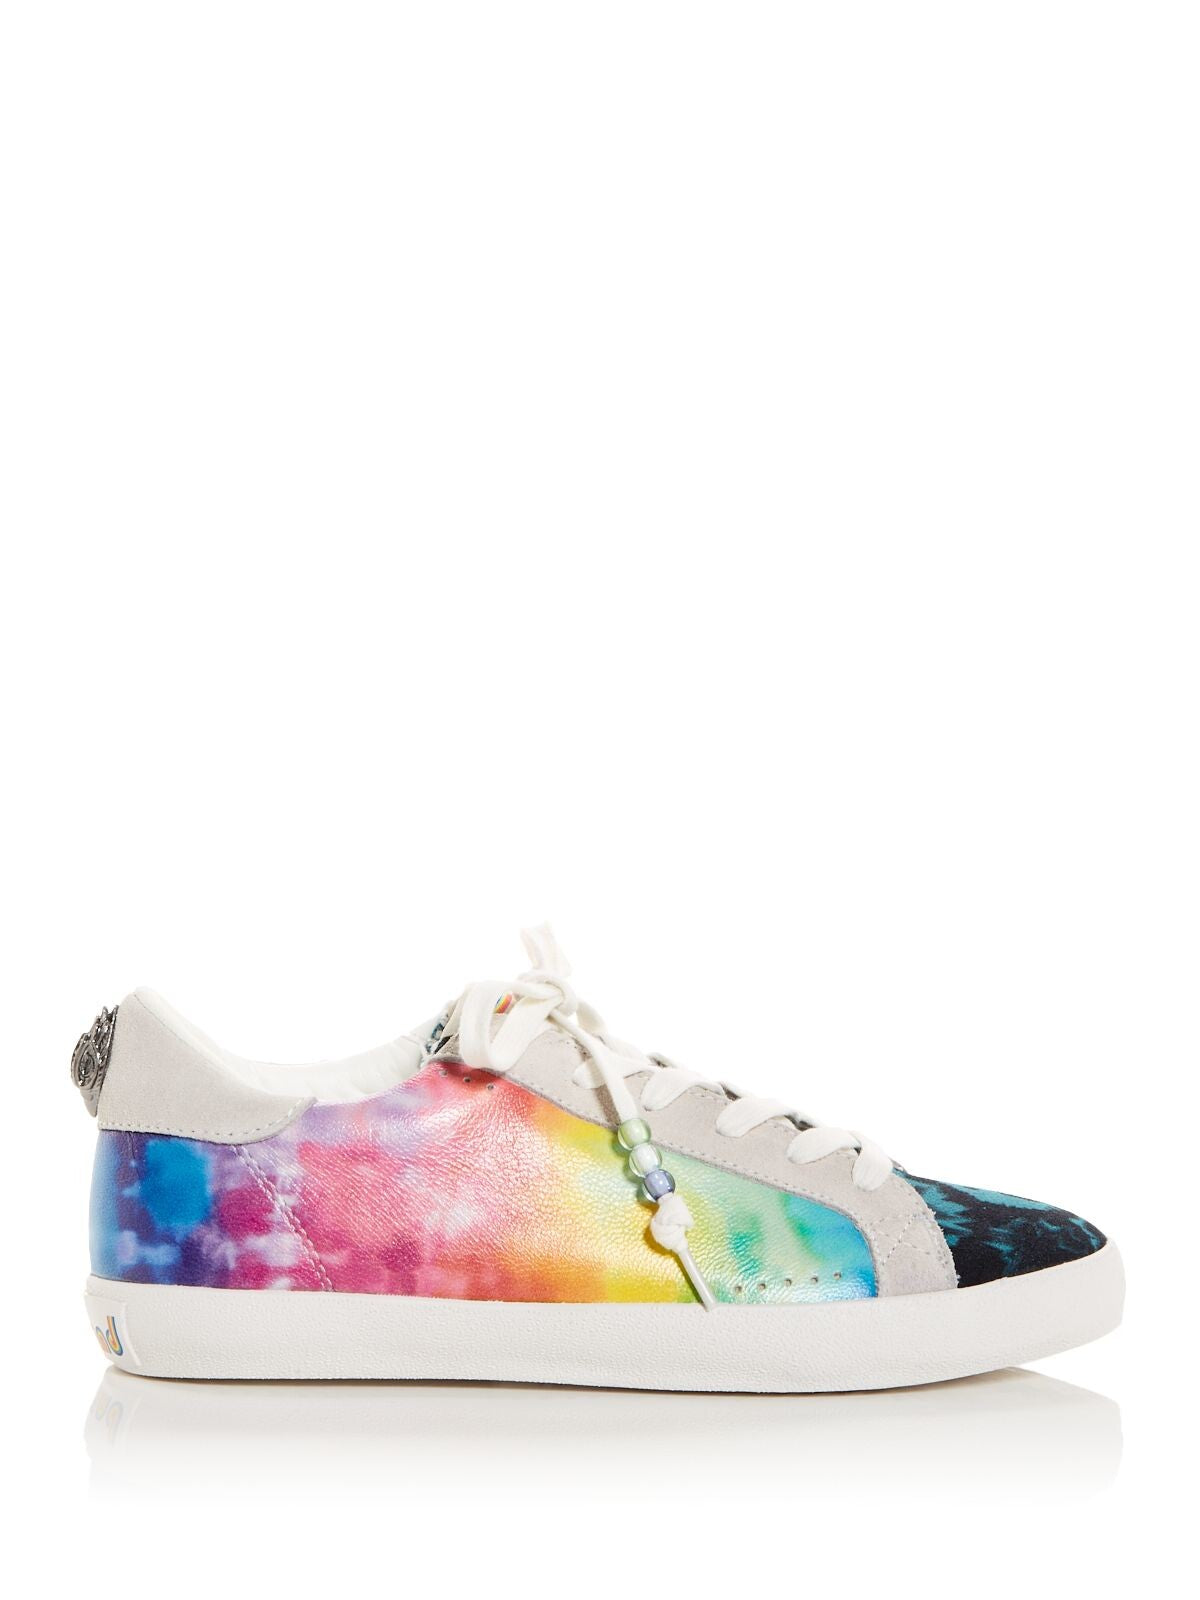 KURT GEIGER Womens Gray Tie Dye Embellished Removable Insole Lexi Round Toe Platform Lace-Up Leather Athletic Sneakers Shoes 38